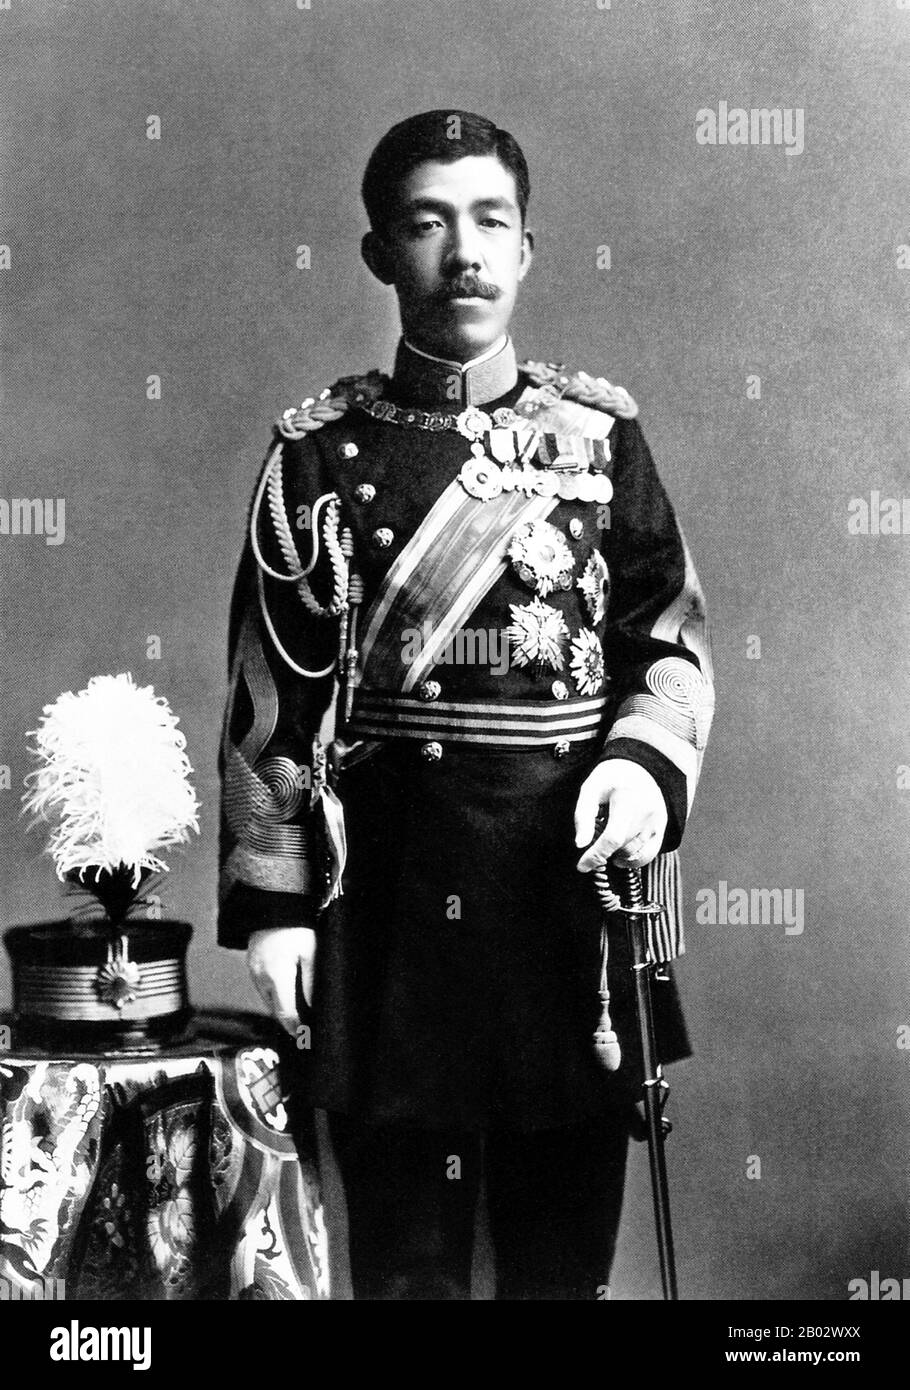 Emperor Taishō (Taisho-tenno, 31 August 1879 – 25 December 1926) was the 123rd Emperor of Japan, according to the traditional order of succession, reigning from 30 July 1912, until his death in 1926.  The Emperor’s personal name was Yoshihito. According to Japanese custom, during the reign the emperor is called the (present) Emperor. After death he is known by a posthumous name that, according to a practice dating to 1912, is the name of the era coinciding with his reign. Having ruled during the Taisho period, he is correctly known as The Taisho Emperor. Stock Photo